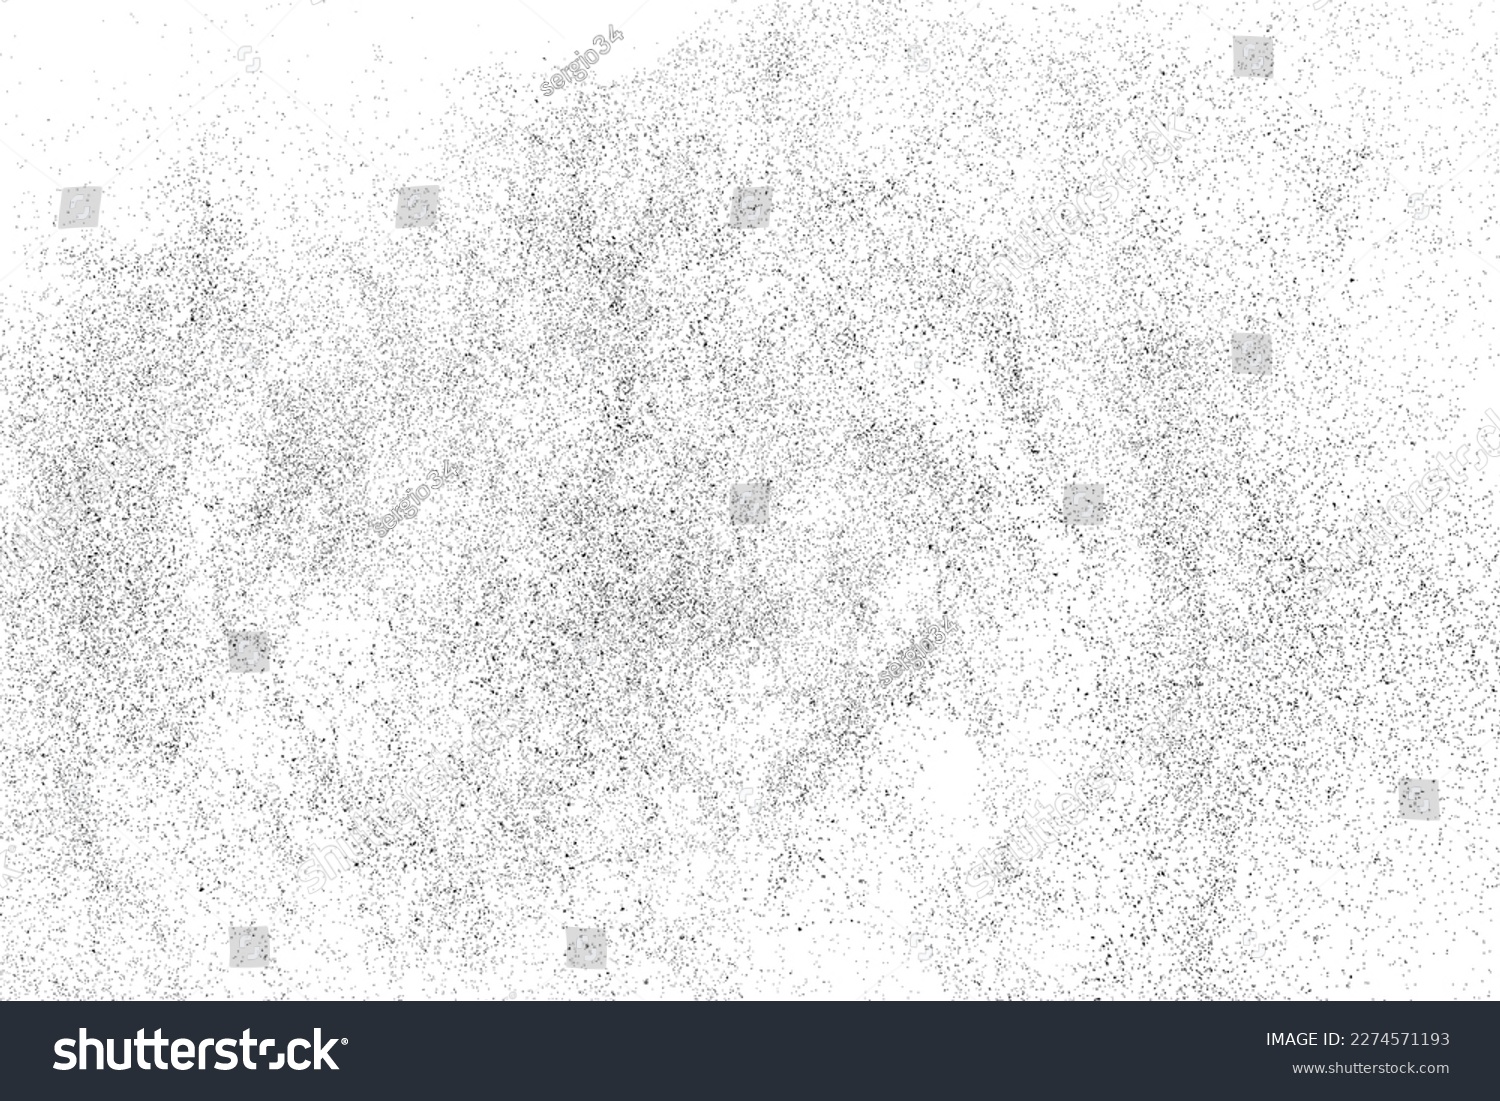 Distressed black texture. Dark grainy texture on white background. Dust overlay textured. Grain noise particles. Rusted white effect. Grunge design elements. Vector illustration, EPS 10. #2274571193